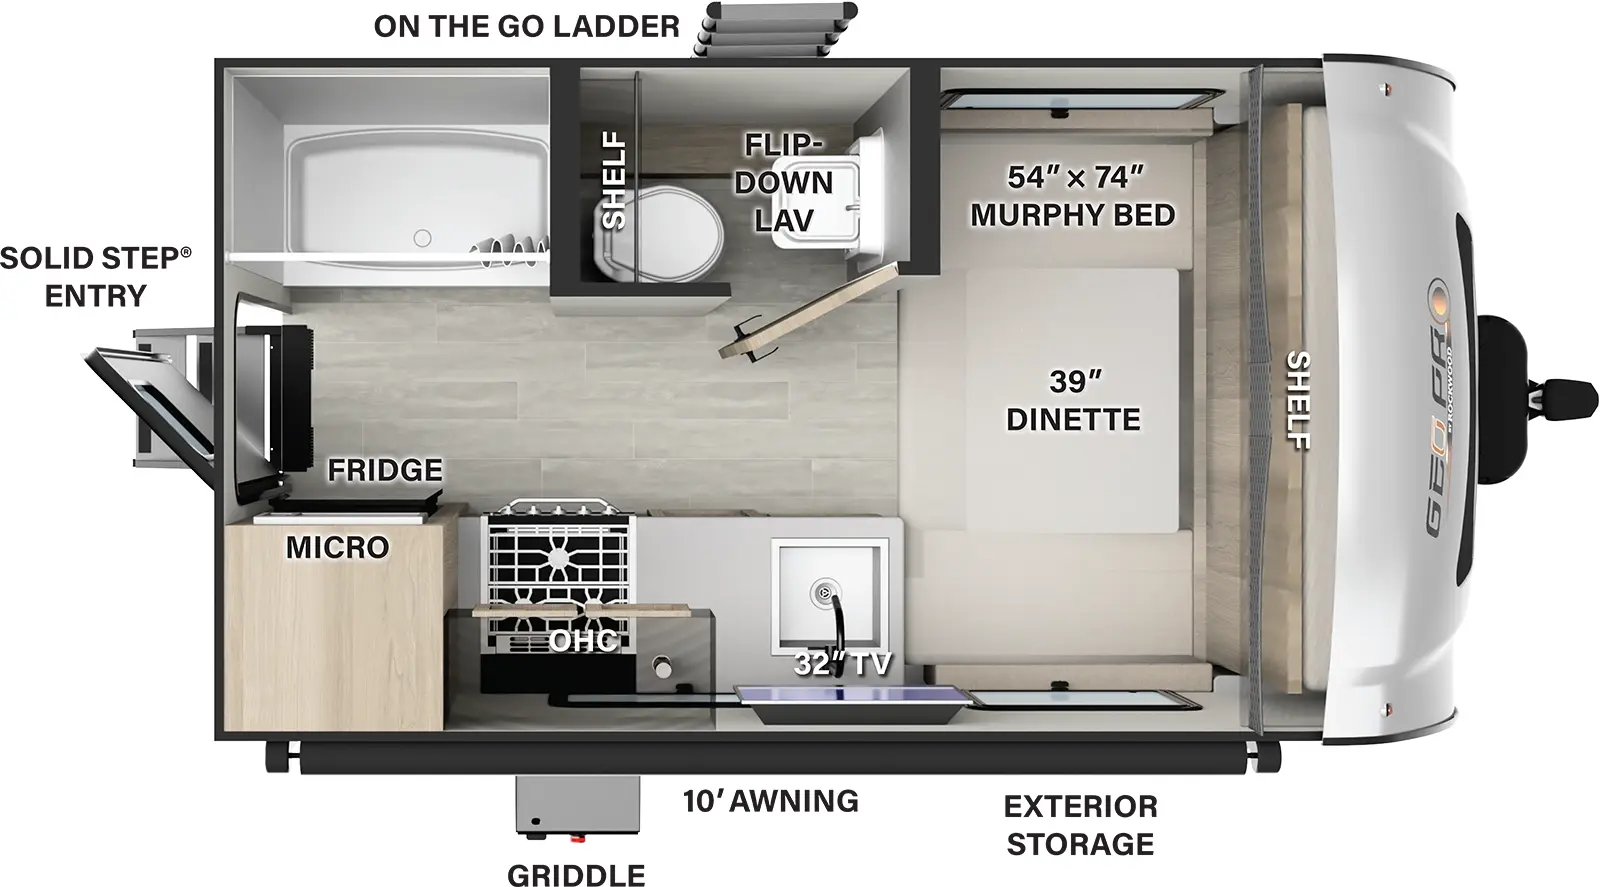 The G15FD has zero slideouts and one entry. Exterior features a 10 foot awning, griddle, exterior storage, off-door side on the go ladder, and rear solid step entry. Interior layout front to back: dinette/murphy bed with shelf above; off-door side room with toilet, shelf and flip-down lavatory only, and a rear shower; door side kitchen counter with sink, TV above, overhead cabinet, cooktop, microwave, and refrigerator; rear entry.